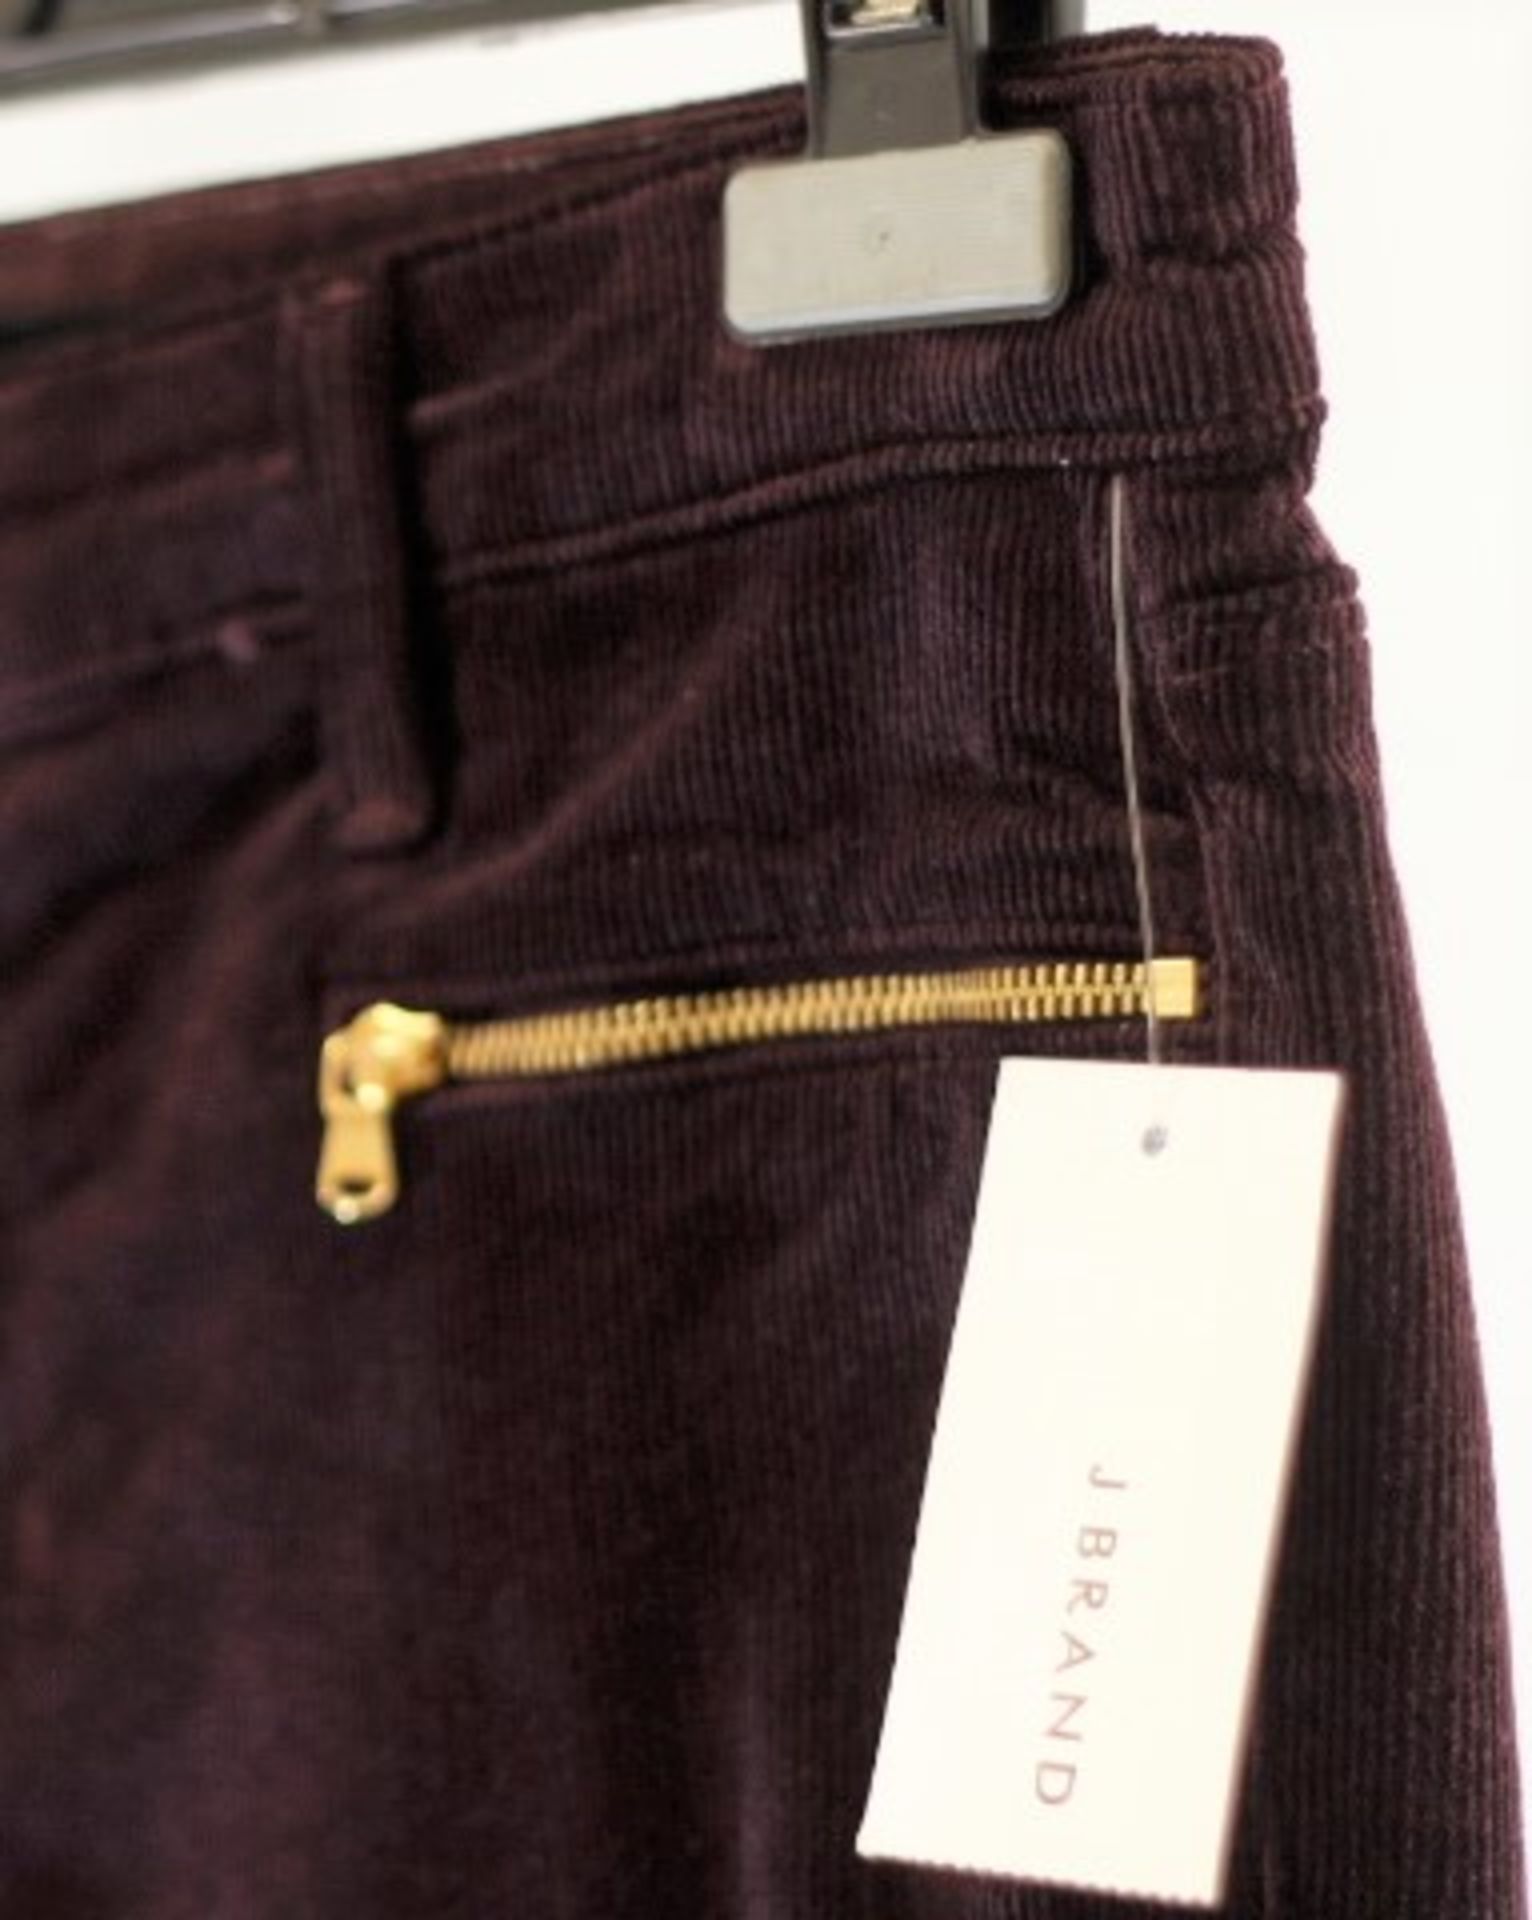 1 x J Brand Blackberry Corduroy Jeans - Size: 6 to 8 - Material: 56% Cotton, 37% Modal, 6% - Image 3 of 6